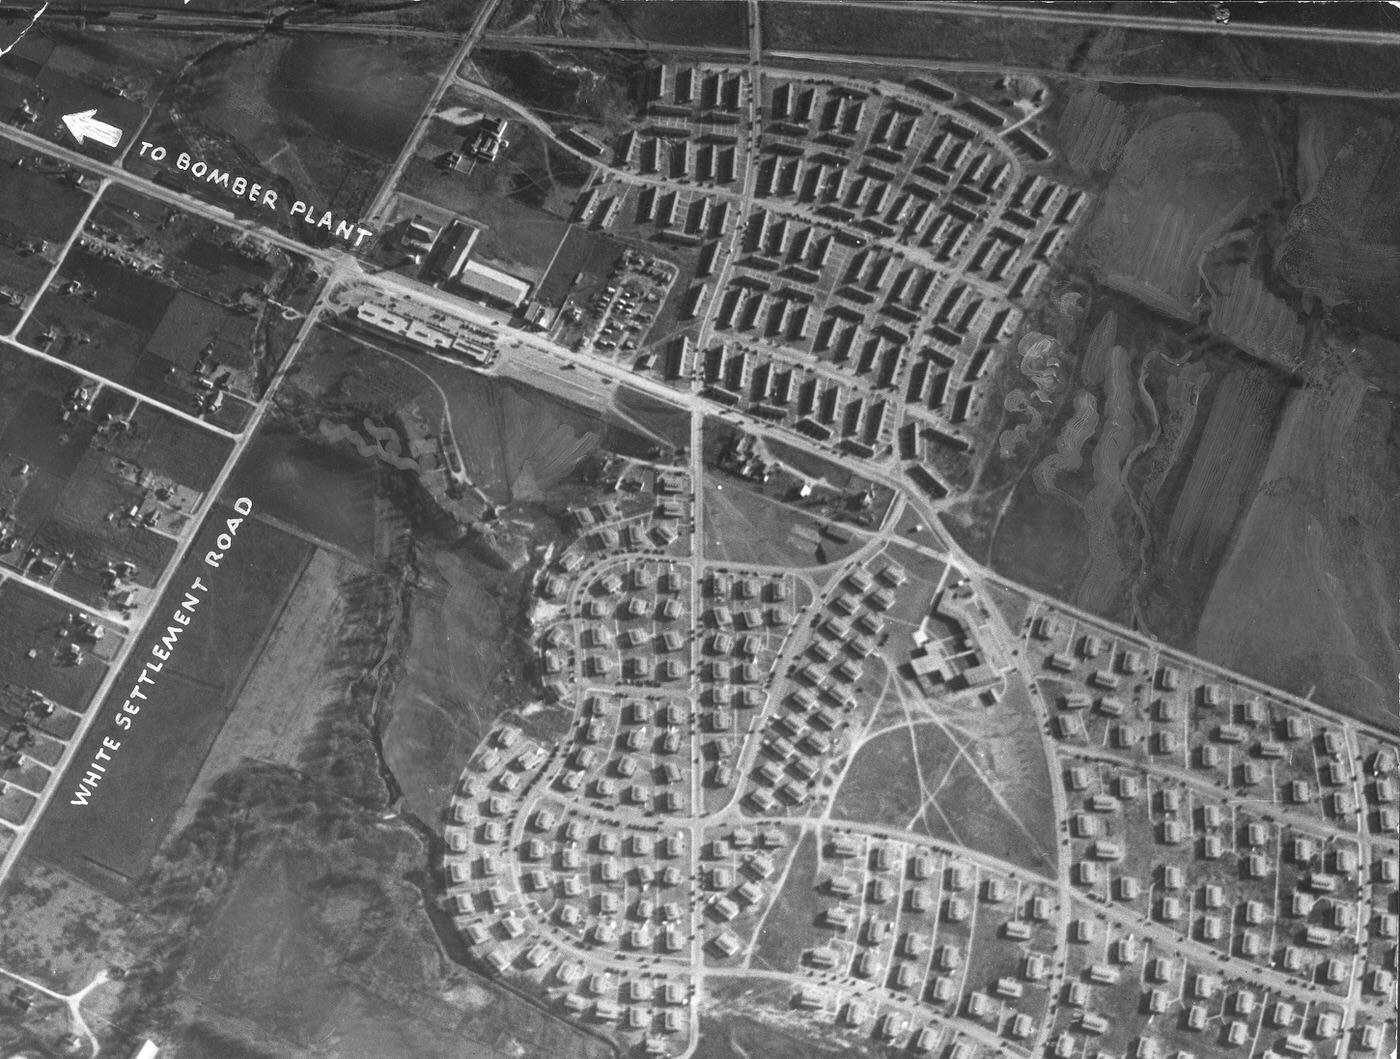 An aerial view of base housing, Carswell Air Force Base, Fort Worth, Texas, 1945